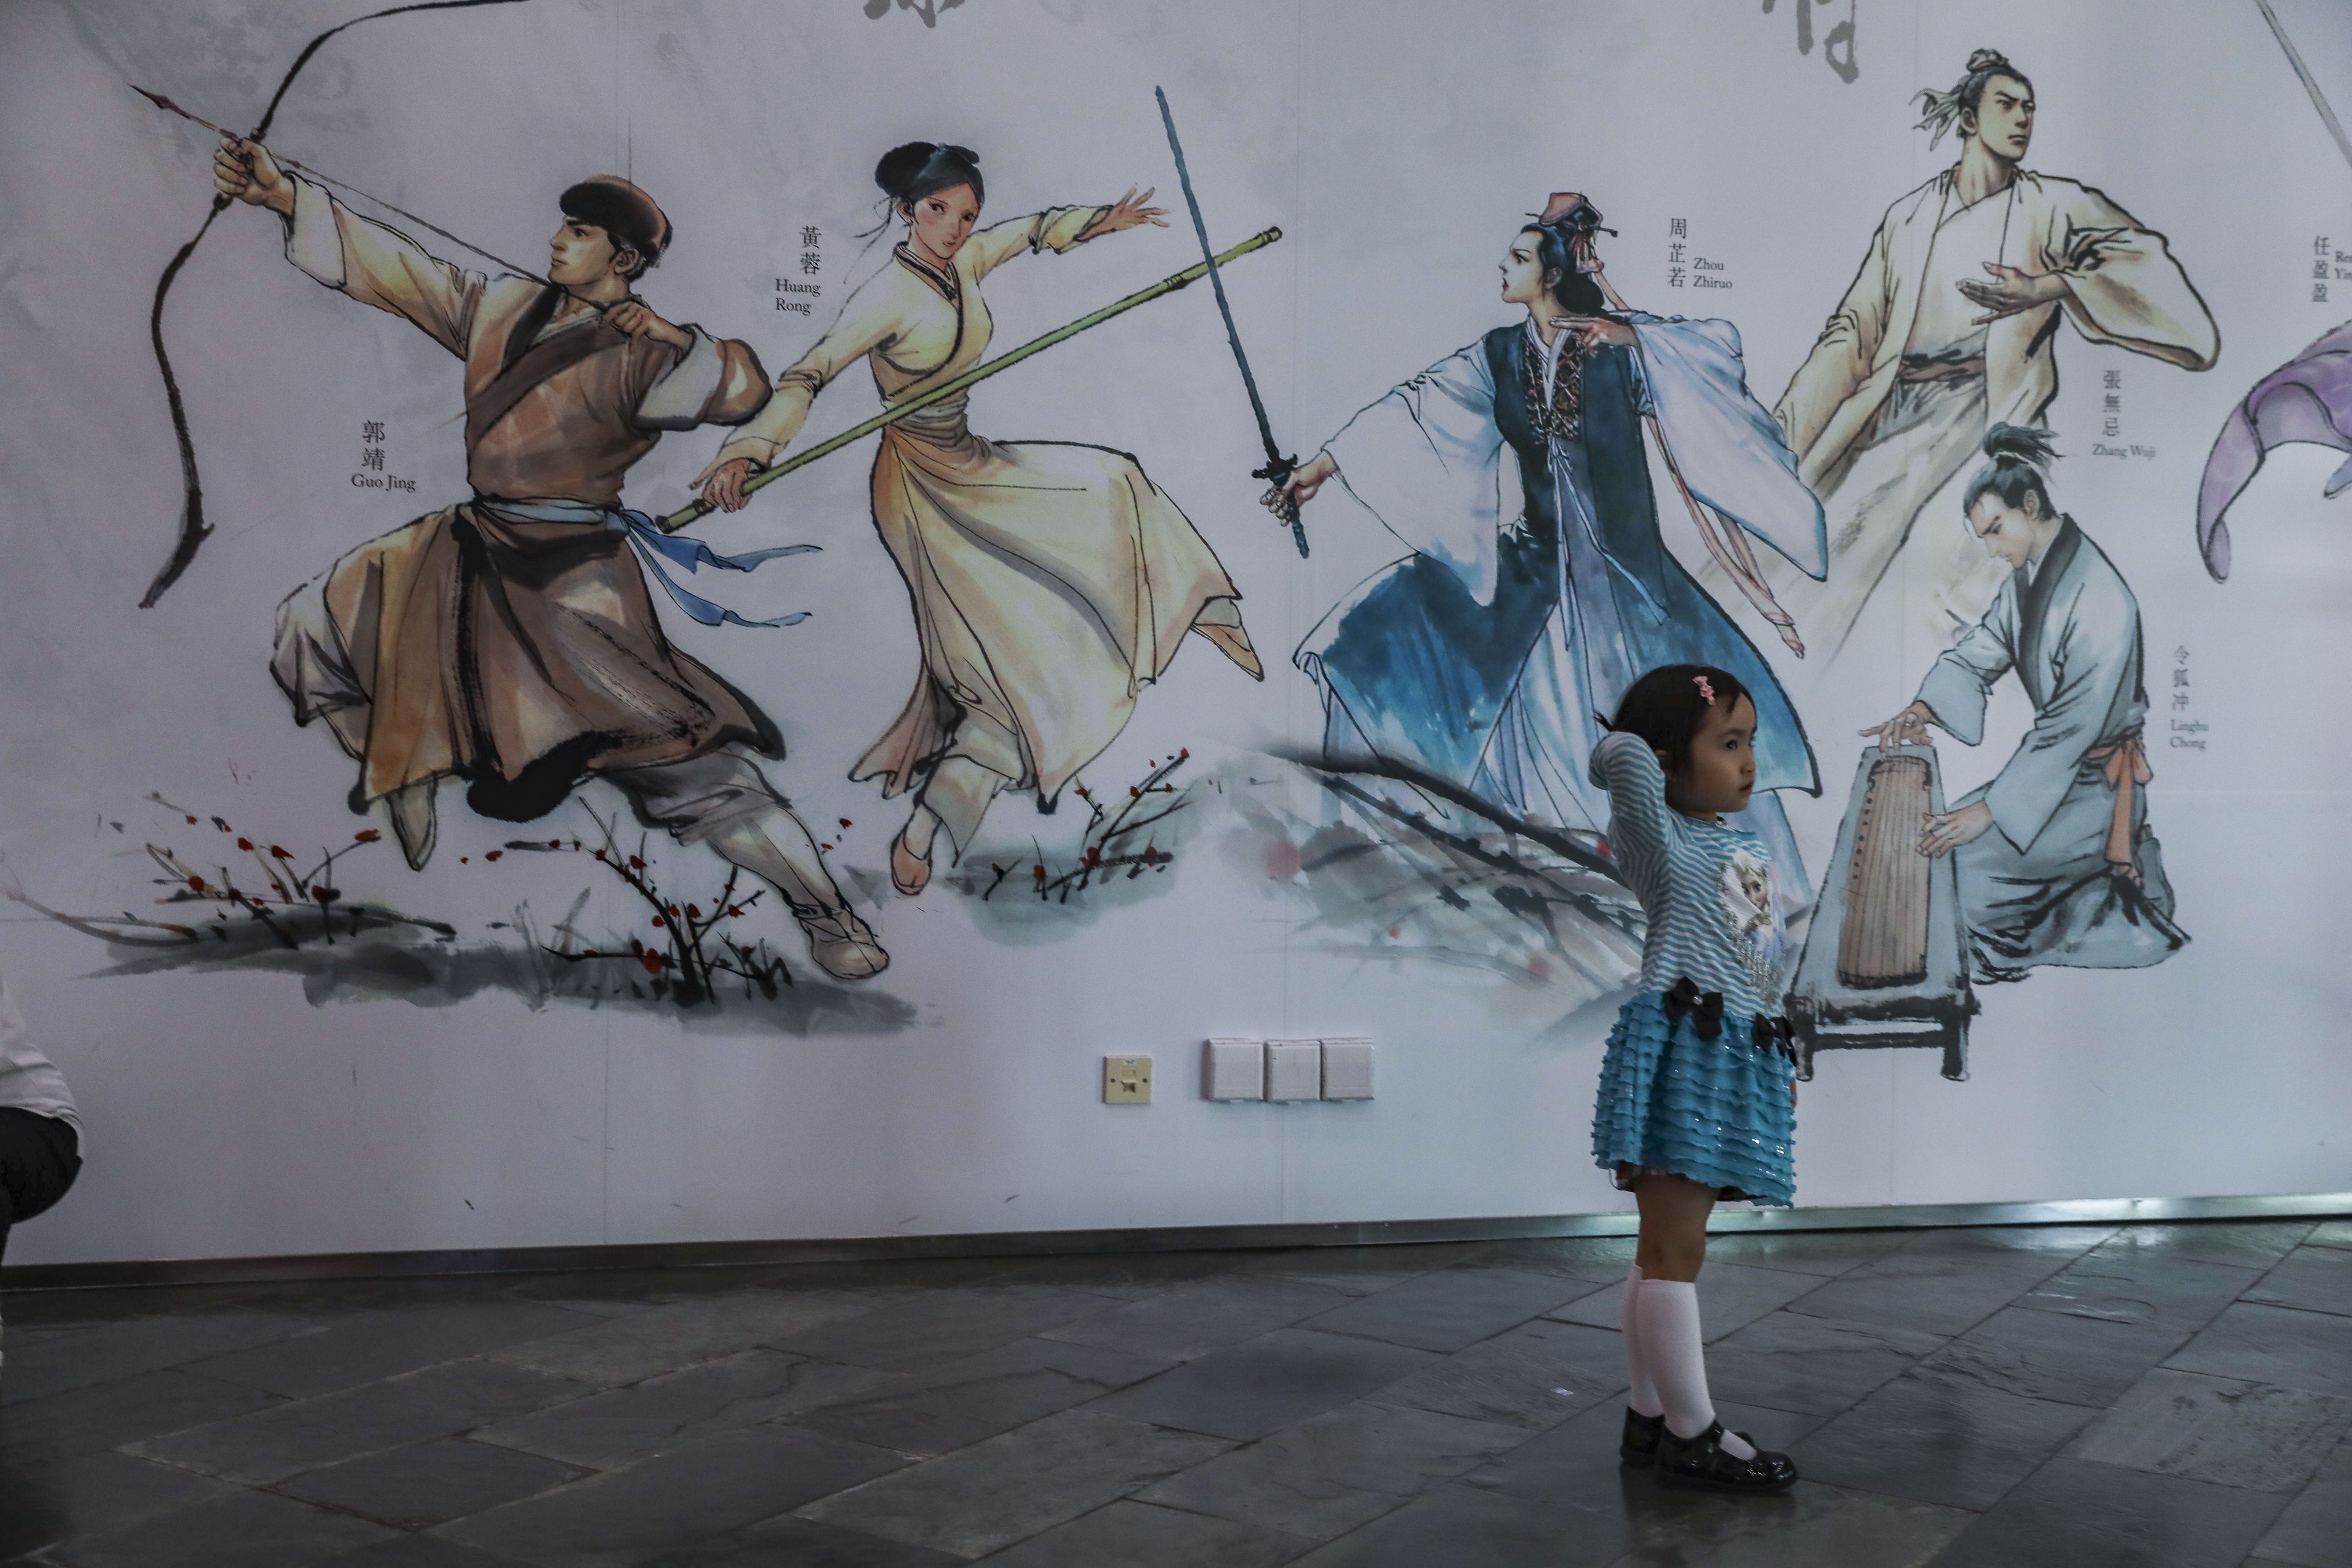 Generations of Hongkongers have grown up with the characters from Louis Cha’s novels. Photo: Nora Tam